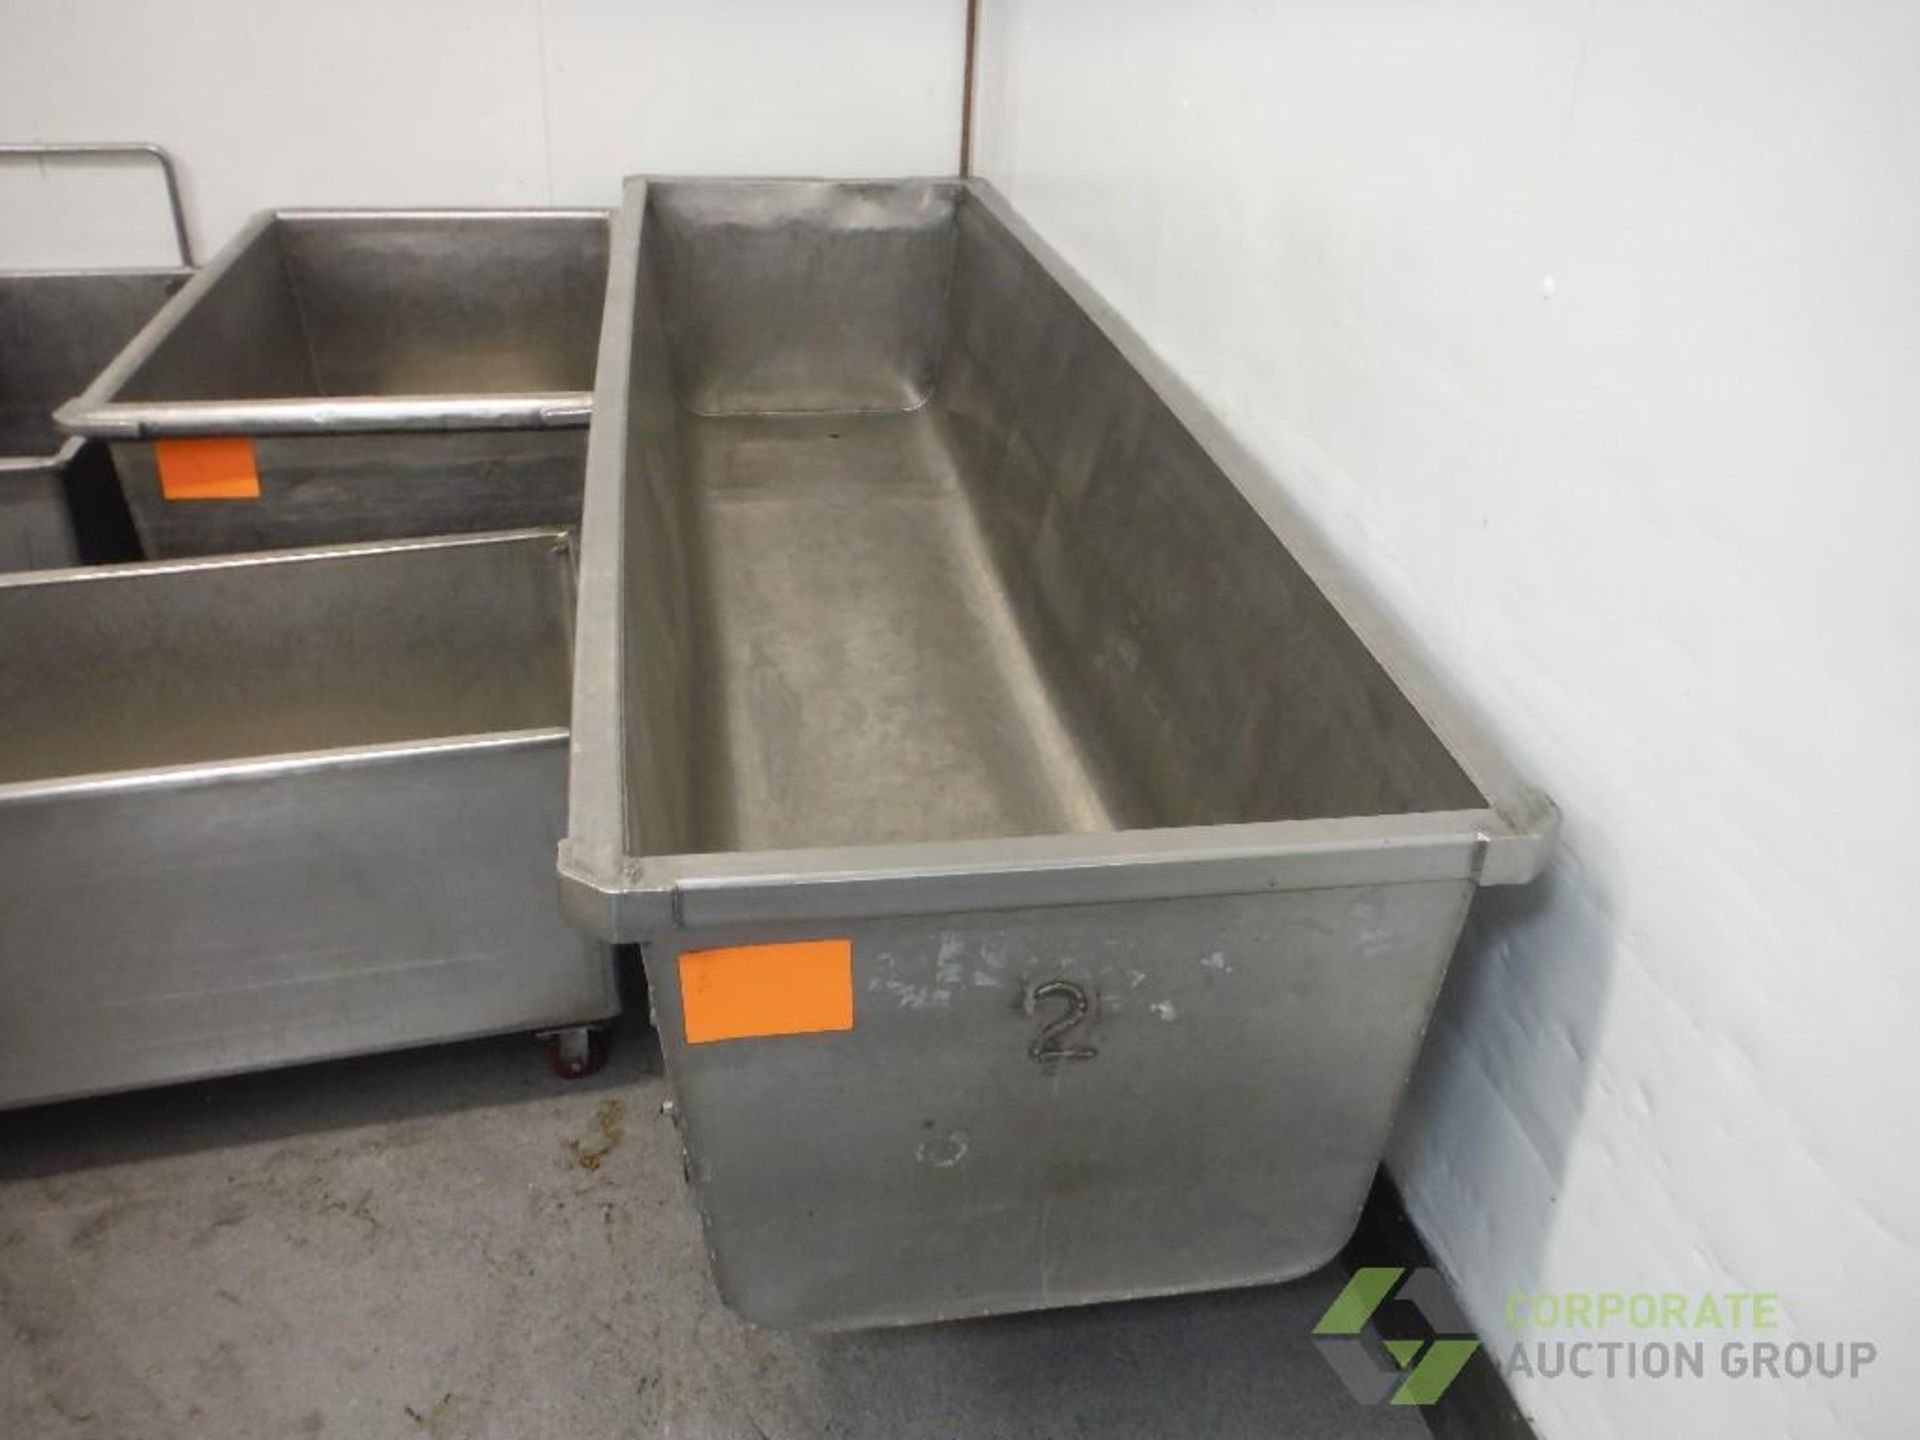 SS trough, 120 in. long x 32 in. wide x 24 in. tall, on casters